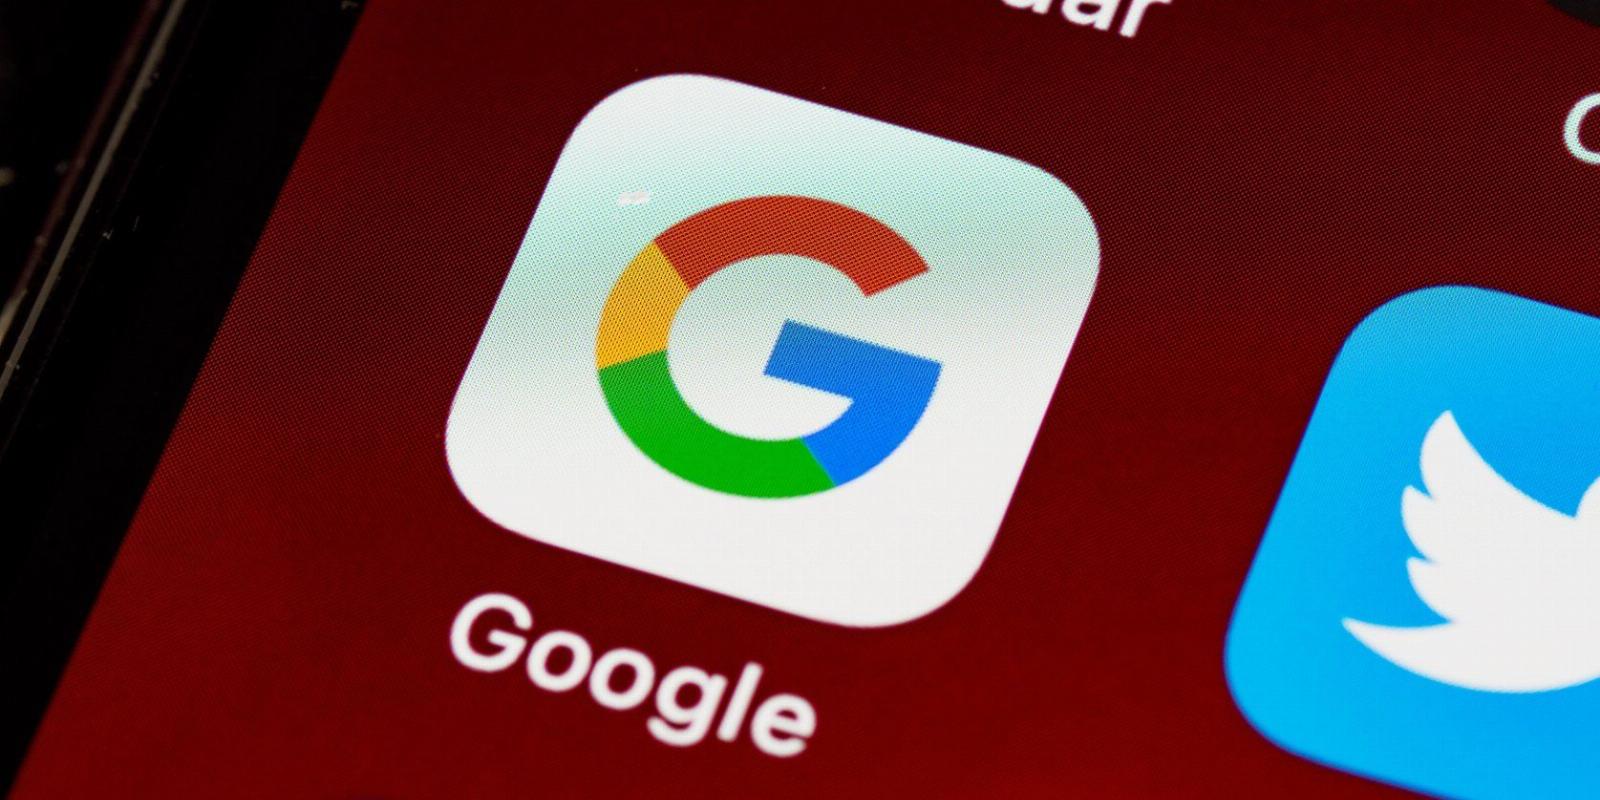 6 Vital Ways Google Apps Use AI to Help You Every Day